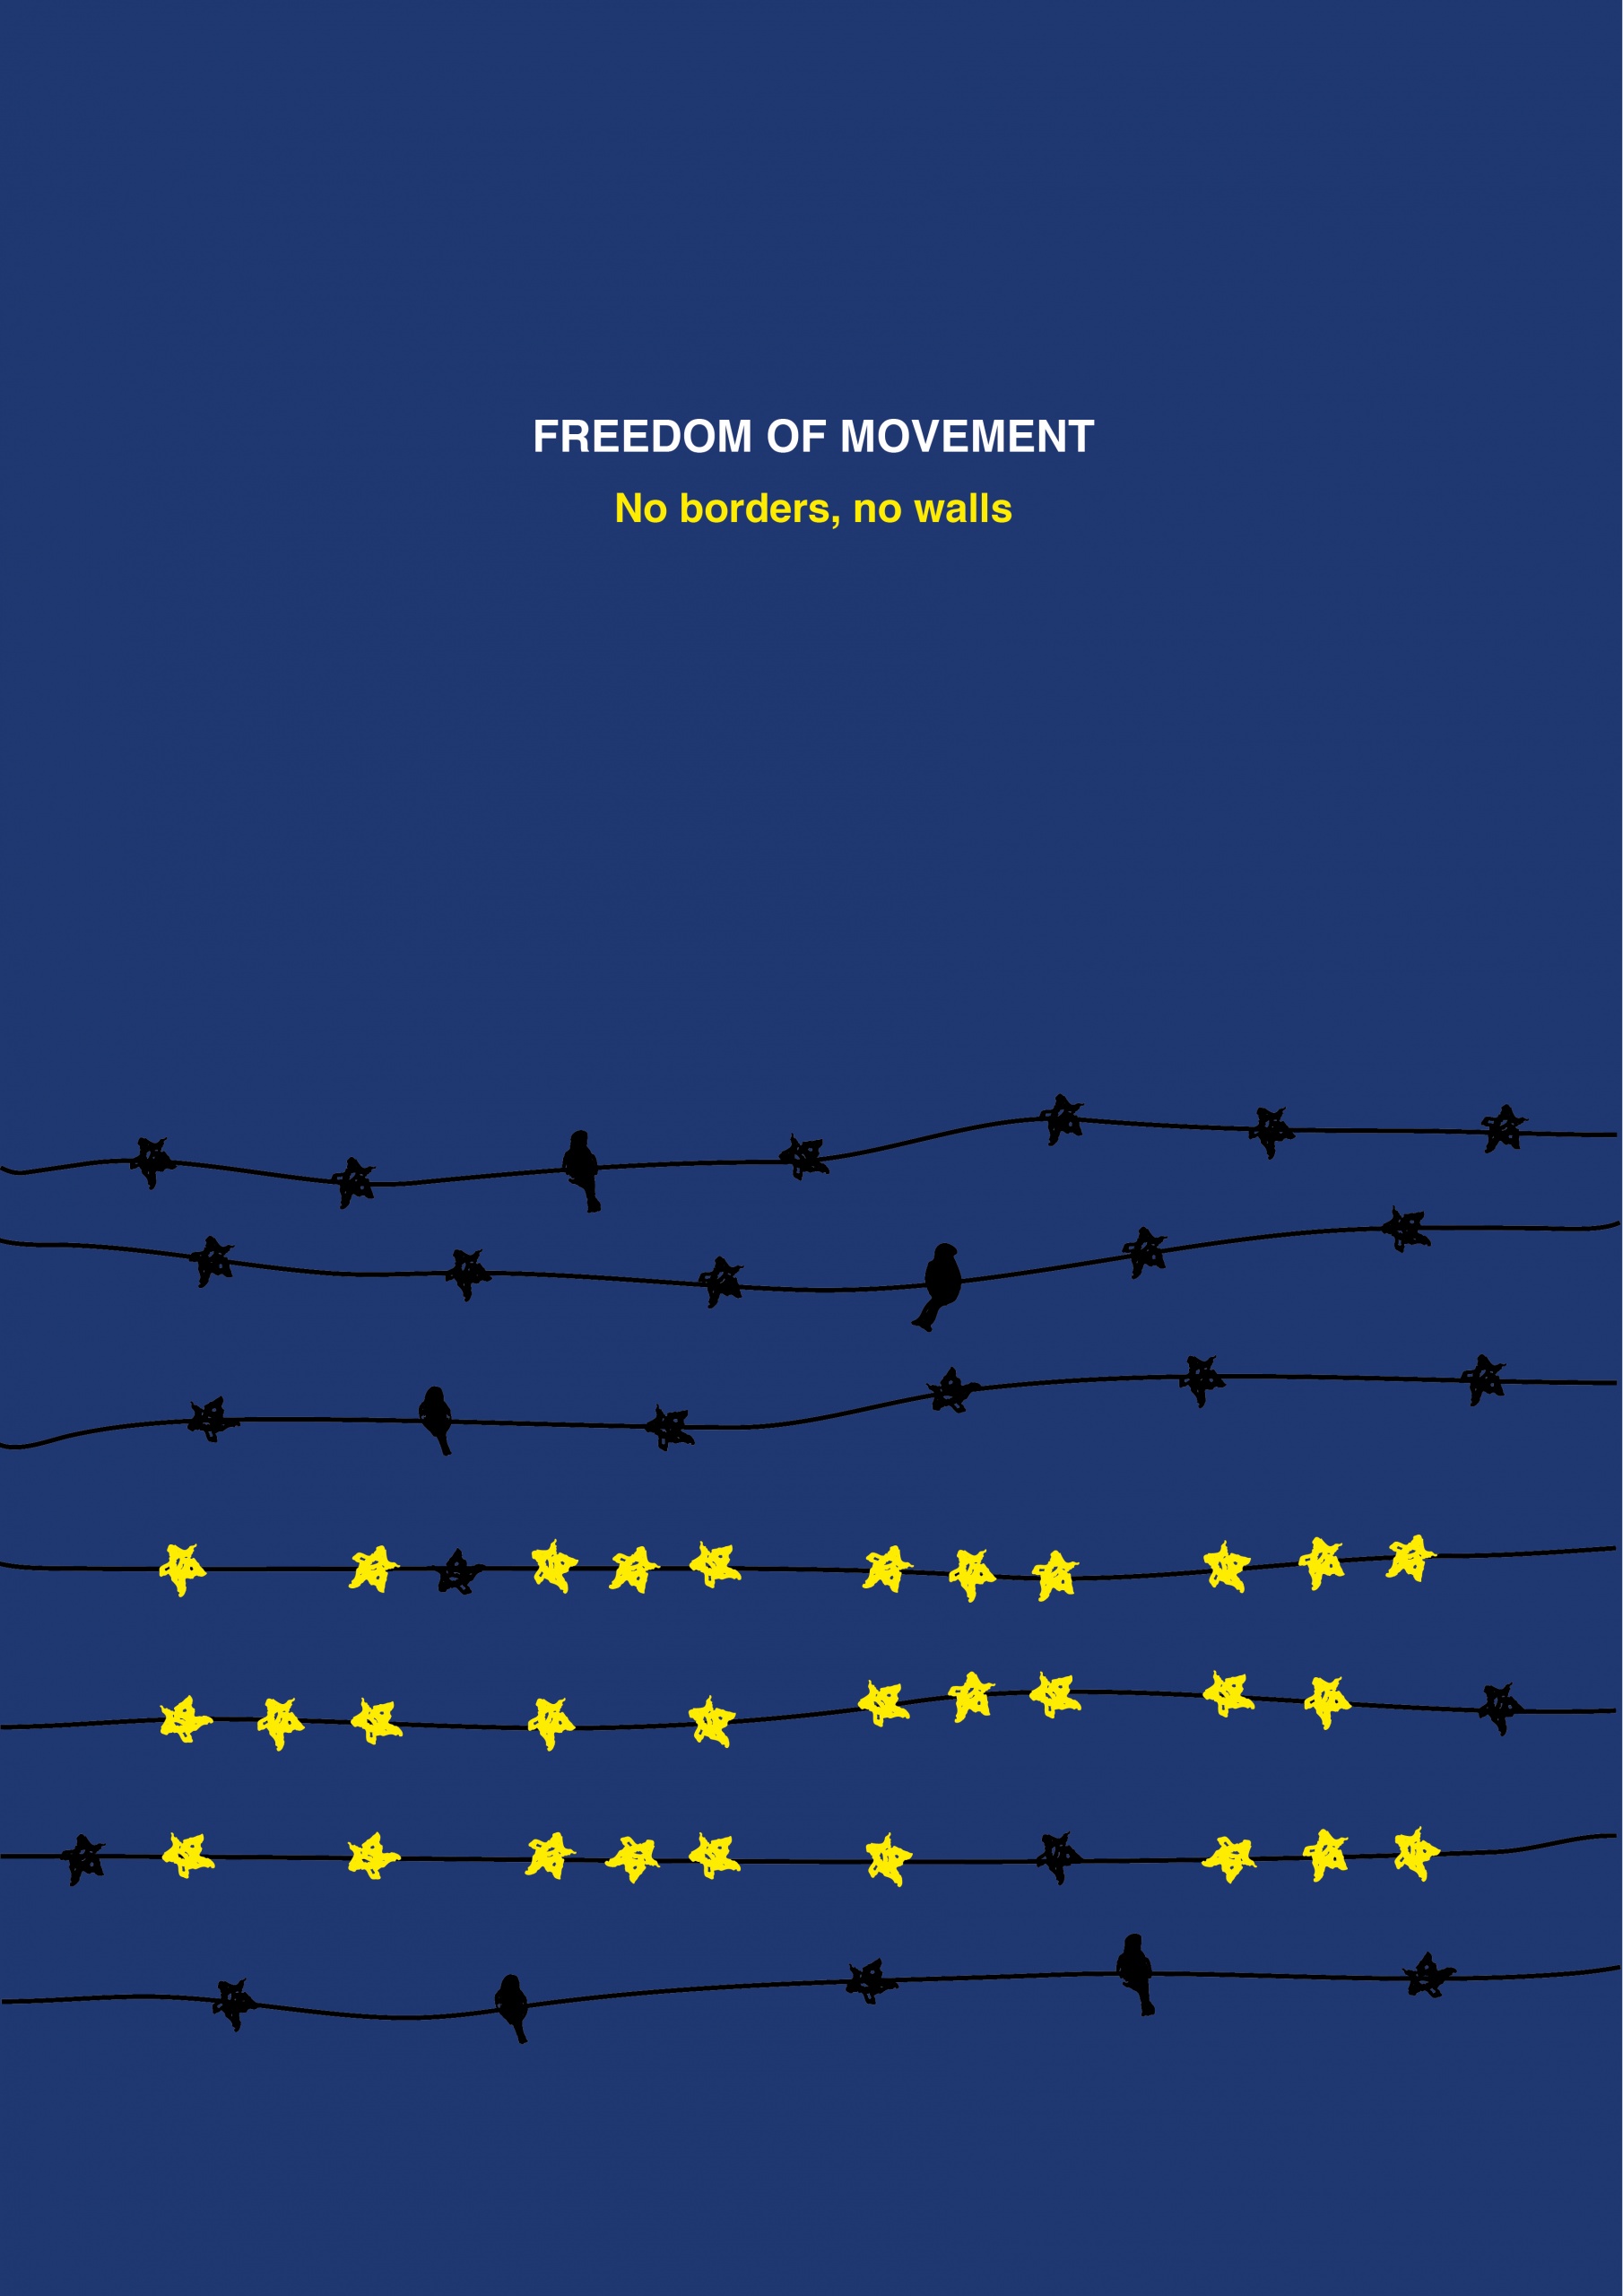 International Poster Competition – Poster for Tomorrow 2017 “Freedom of Movement”.